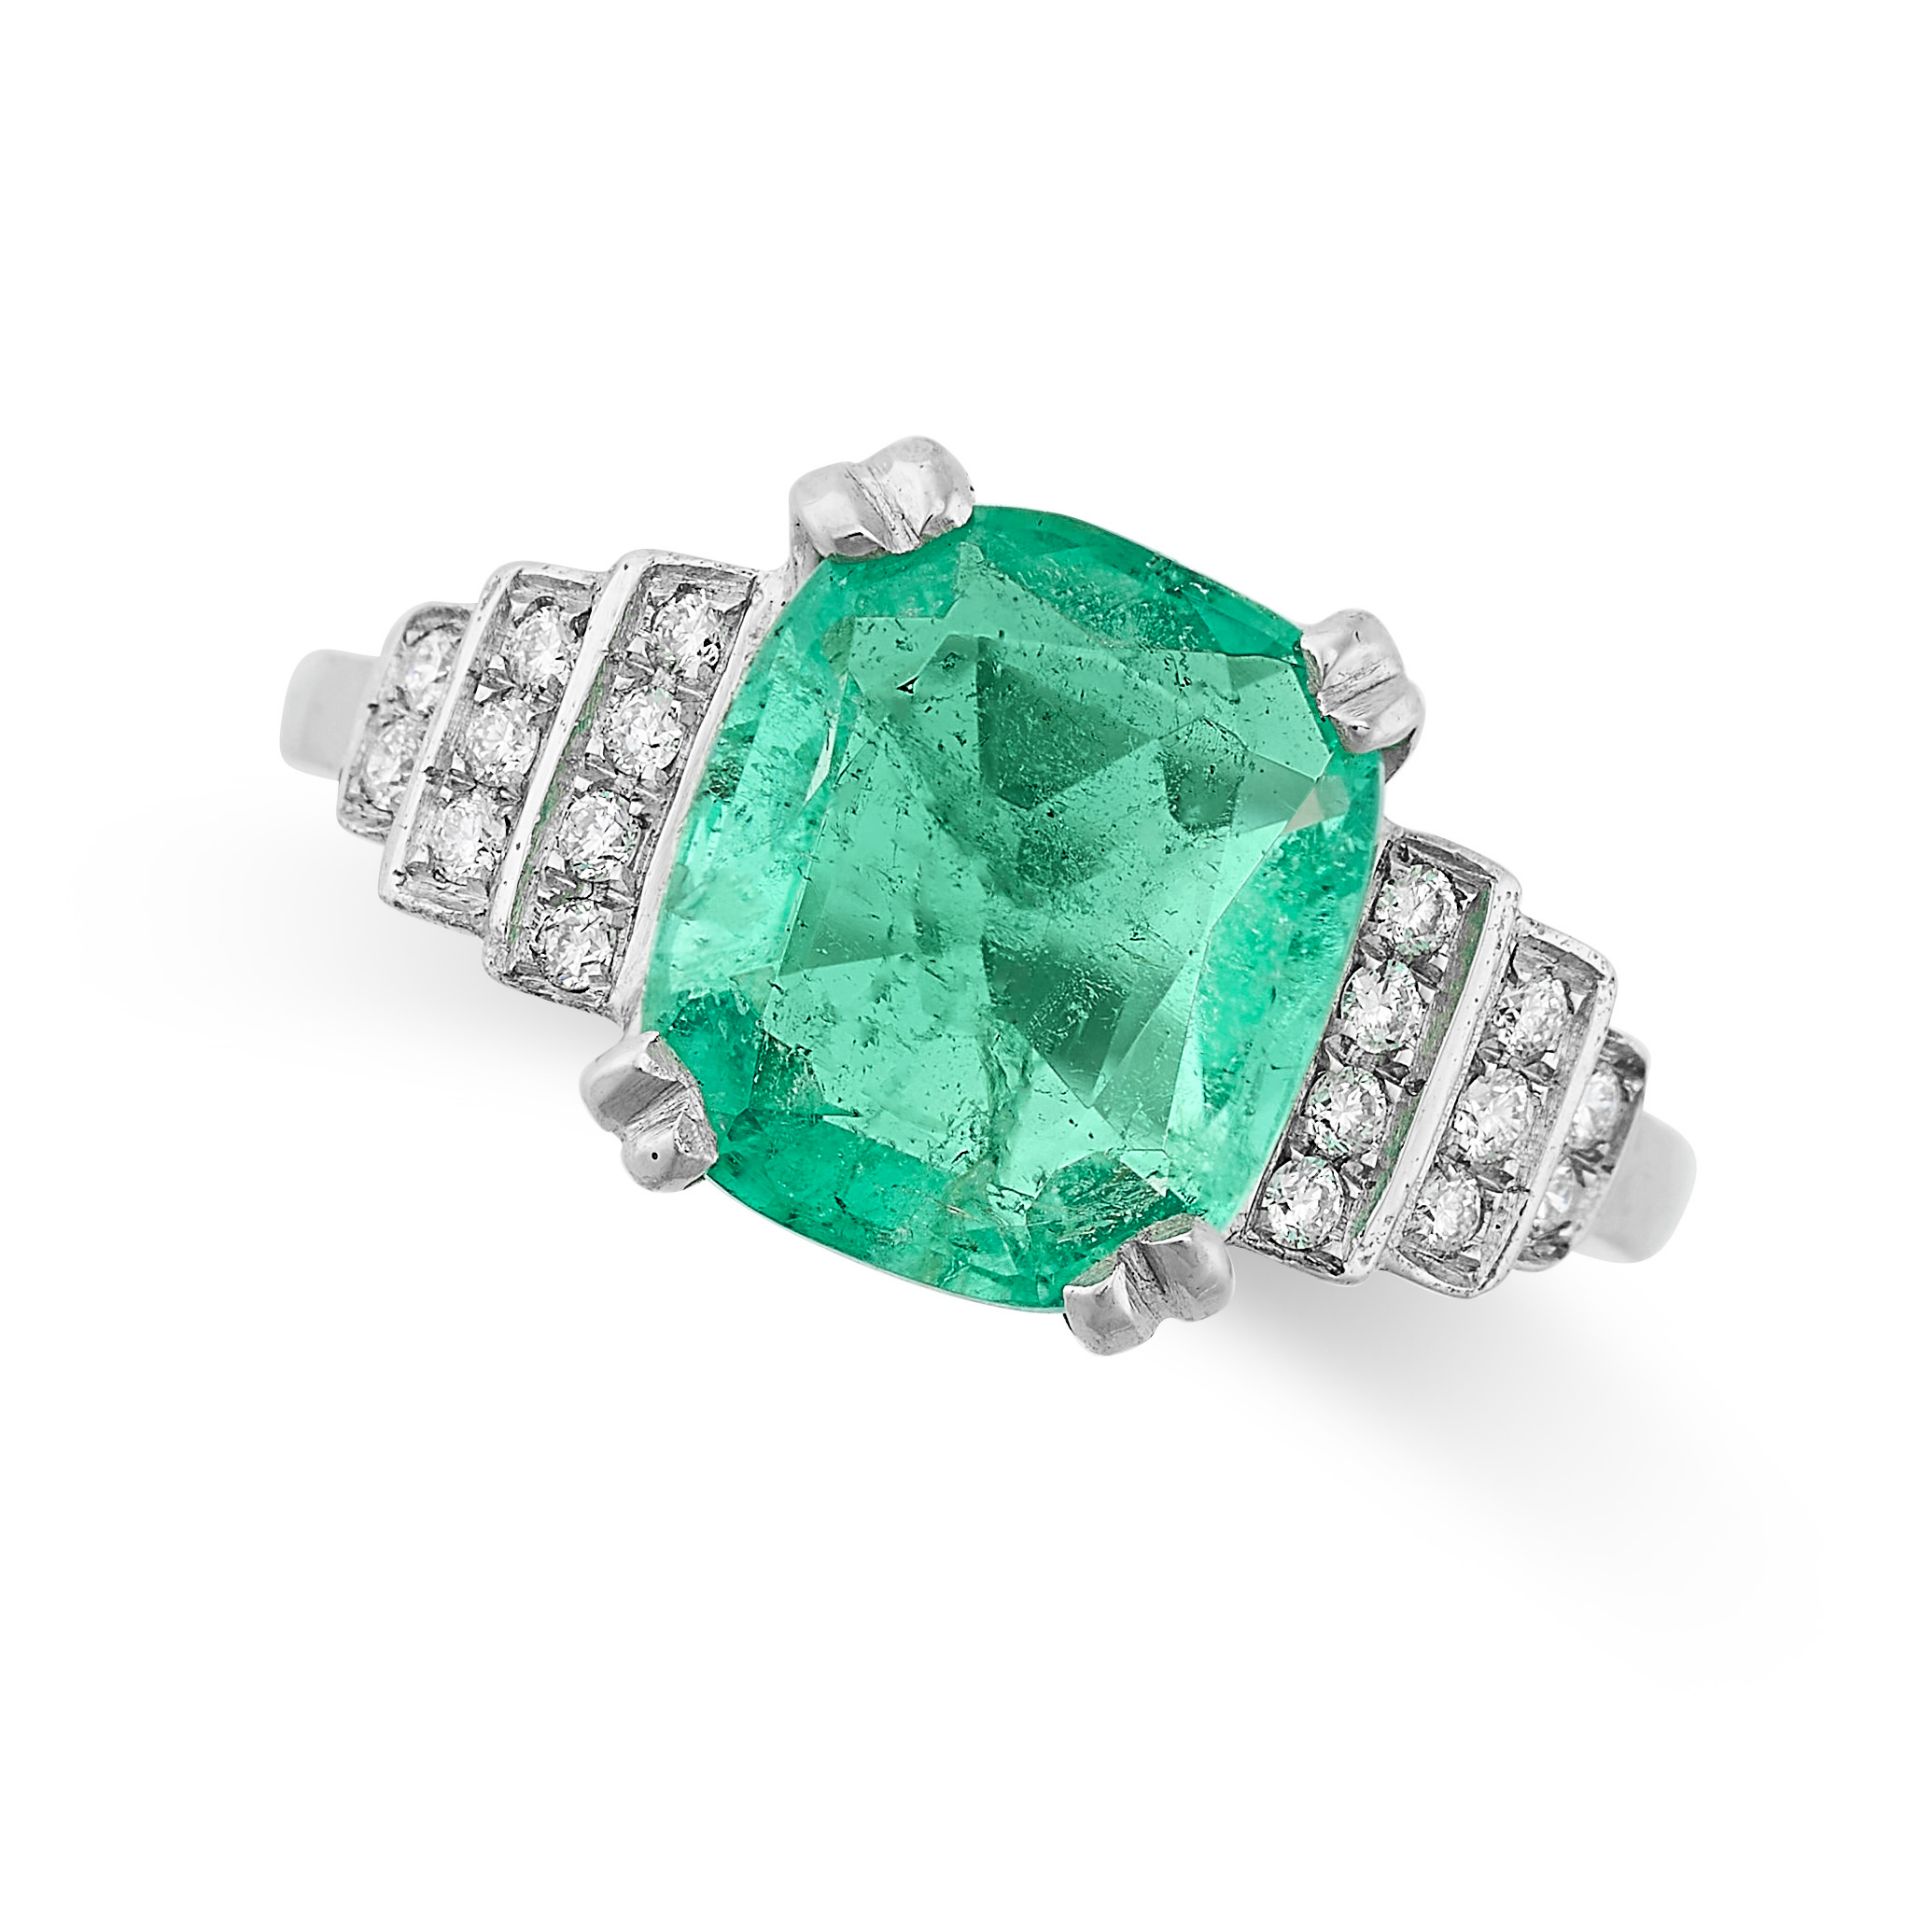 NO RESERVE - AN EMERALD AND DIAMOND RING in 18ct white gold, set with a cushion cut emerald of 2....